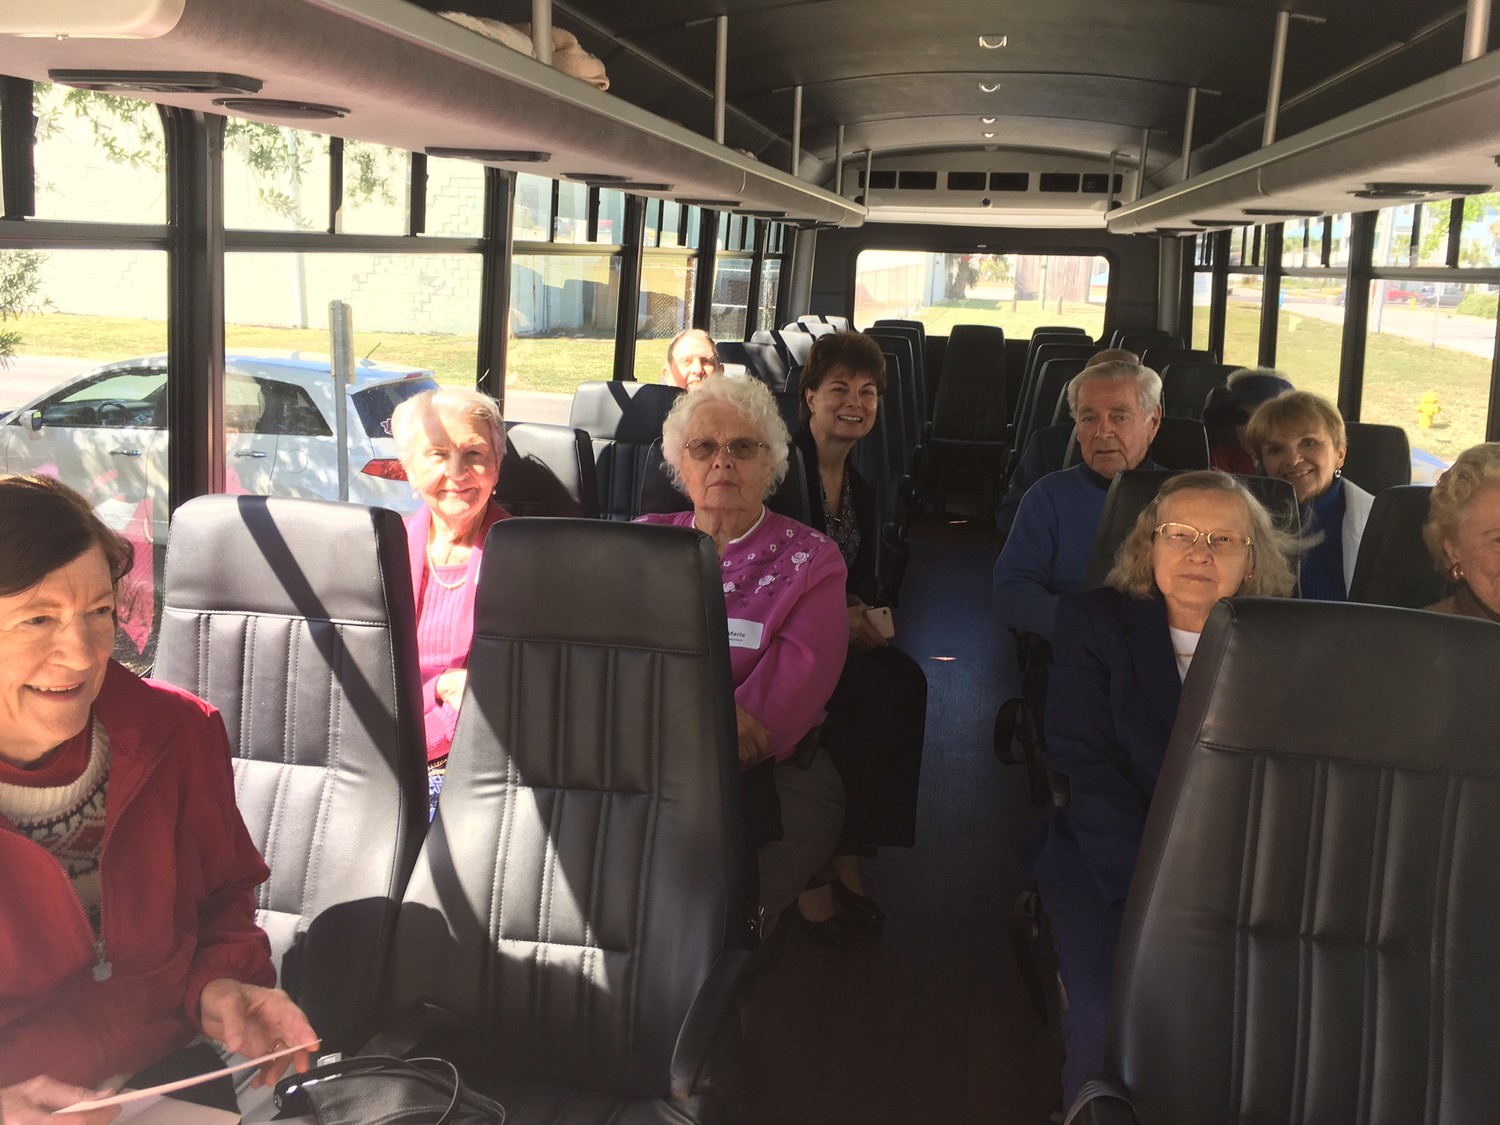 Vicar’s Landing residents who support Mission House travel by bus to visit the Beaches homeless day facility on March 22.